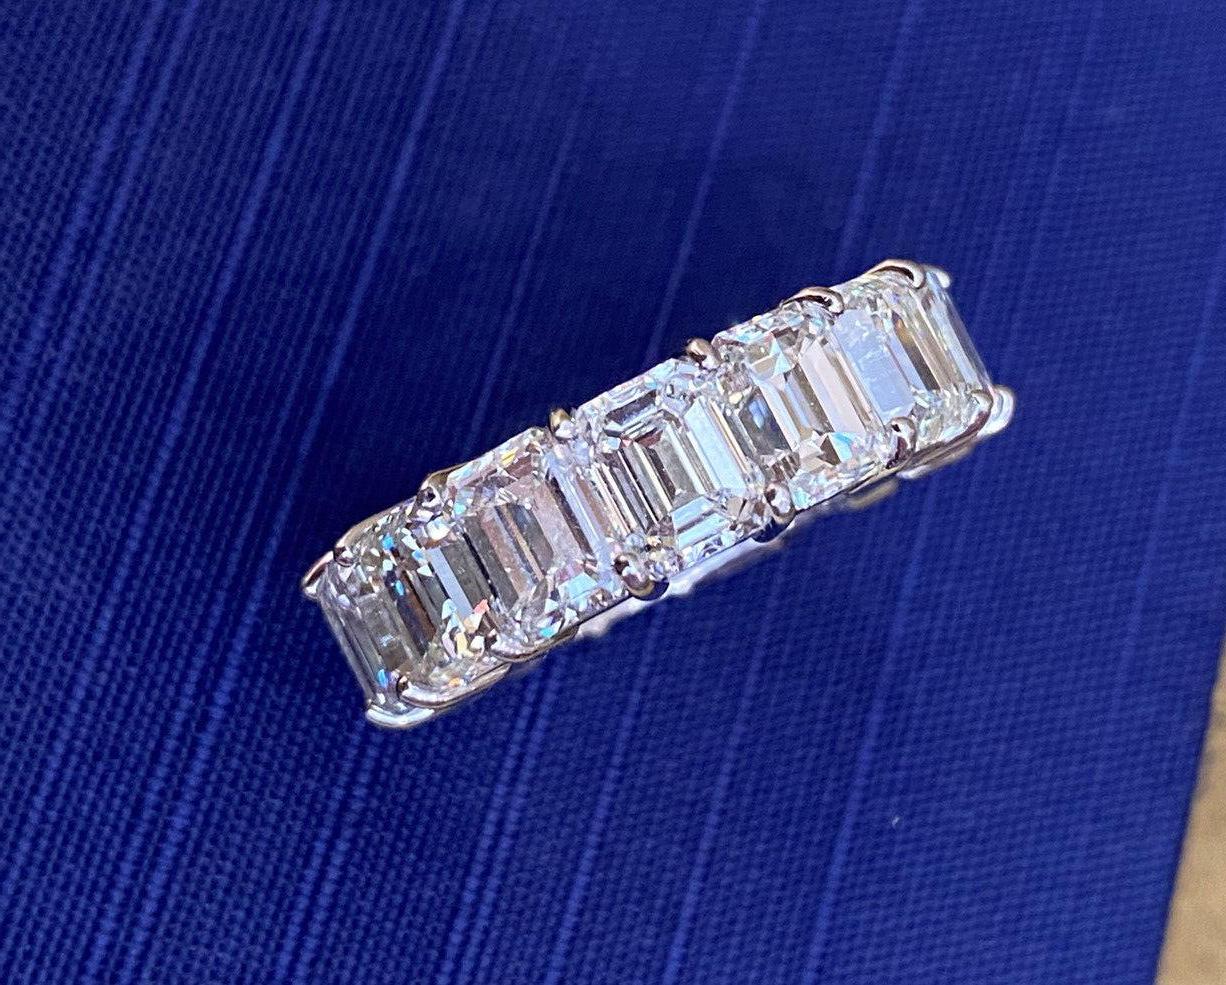 15.16 carats Emerald Cut Diamond Eternity Band in Platinum
Features 
15 Emerald cut diamonds
averaging 1.01 carat each
for a total diamond weight of 15.16 carats

Diamond quality SI1 to I2 clarity, L color 
(approximated in the setting)

Set in a